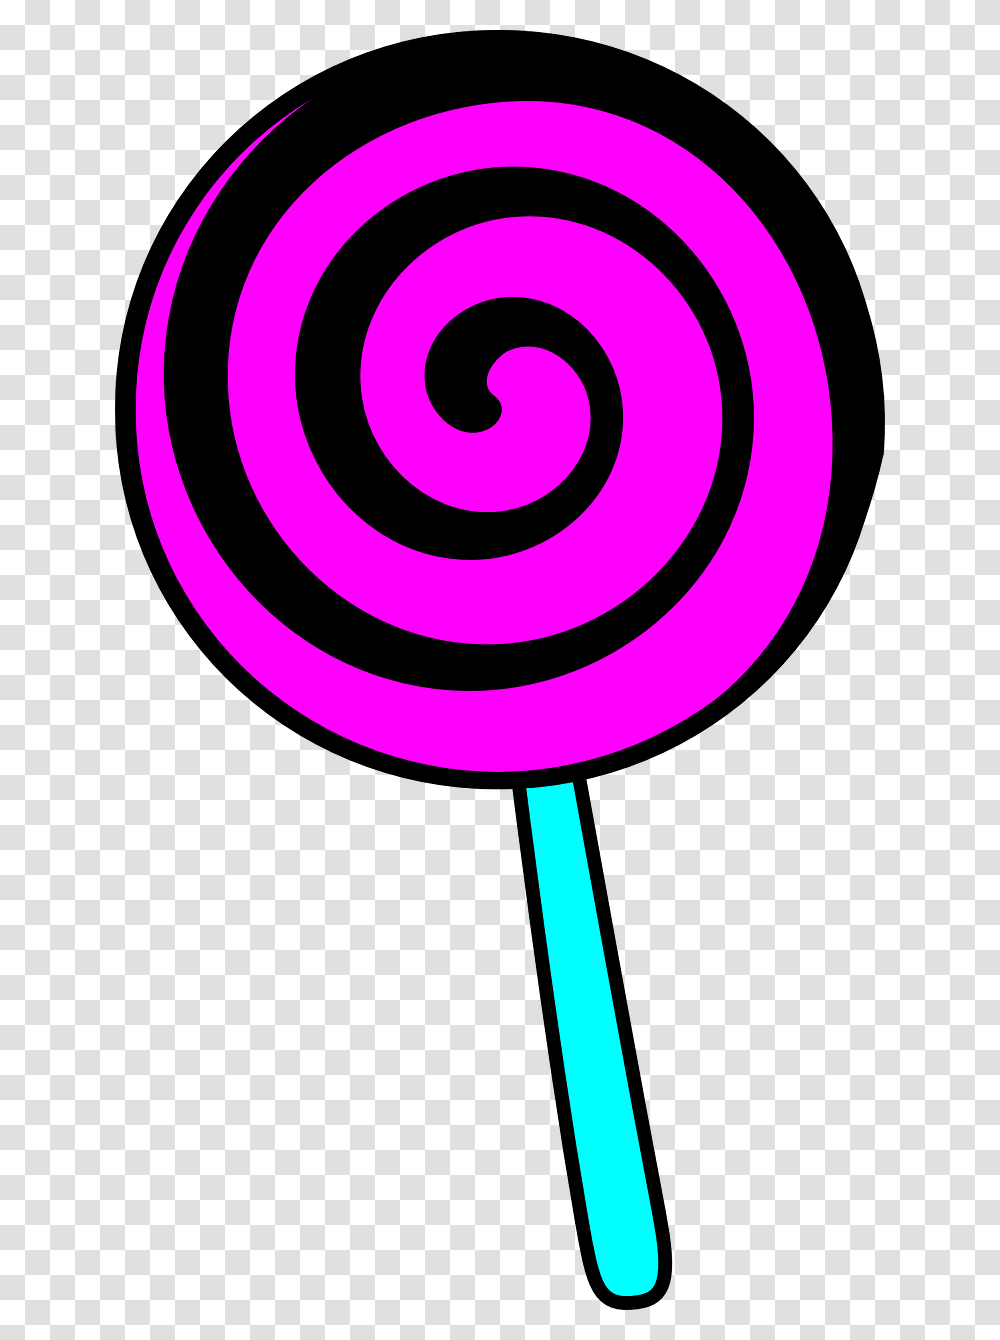 Candy Lollipop Sweets Free Picture Cartoon Images Of Lollipops, Food, Confectionery, Spiral Transparent Png